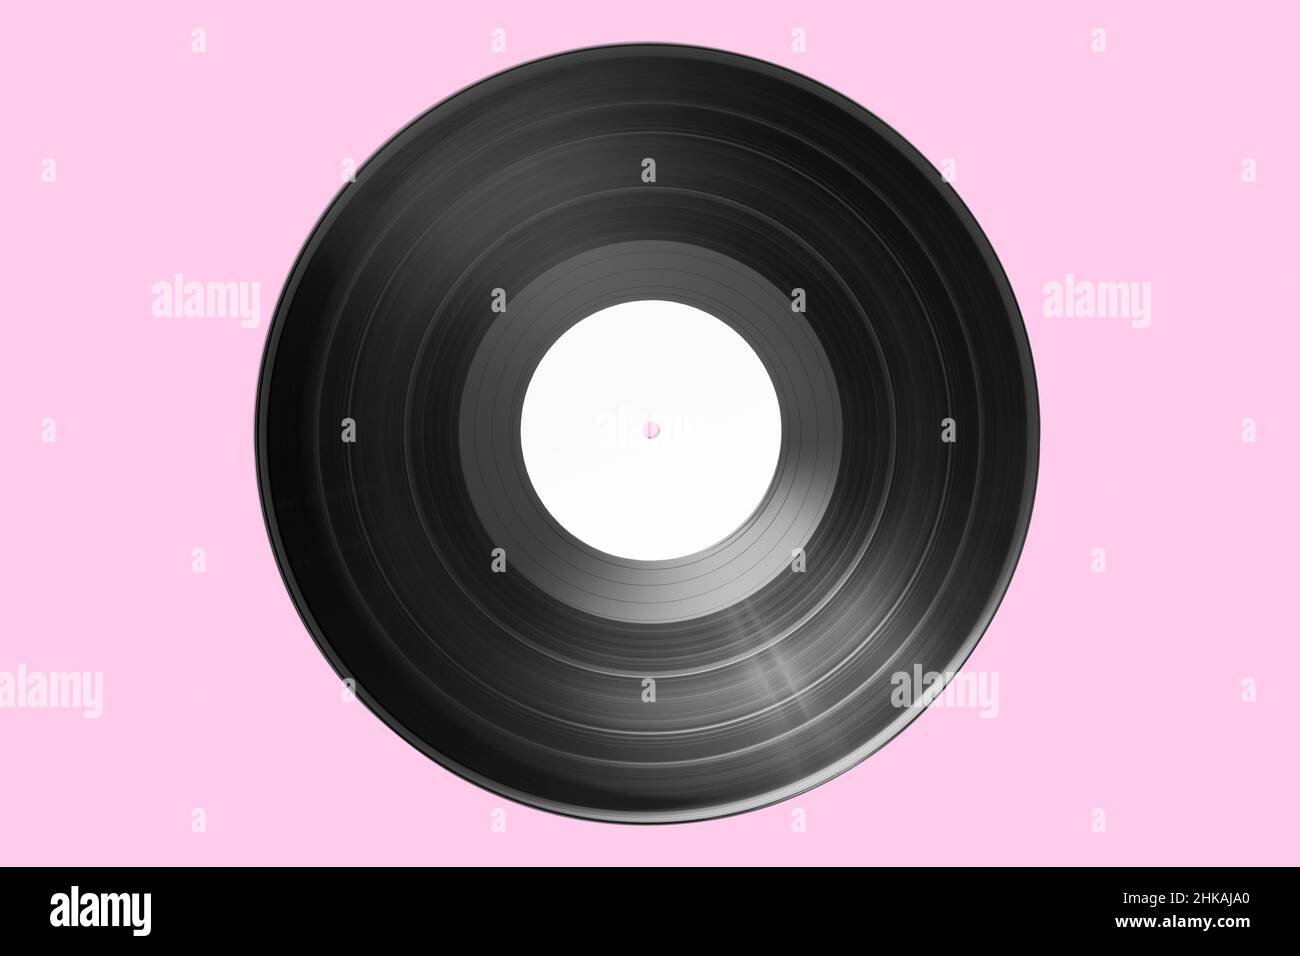 Vinyl record with bank label isolated on pink background. Mock up Stock Photo